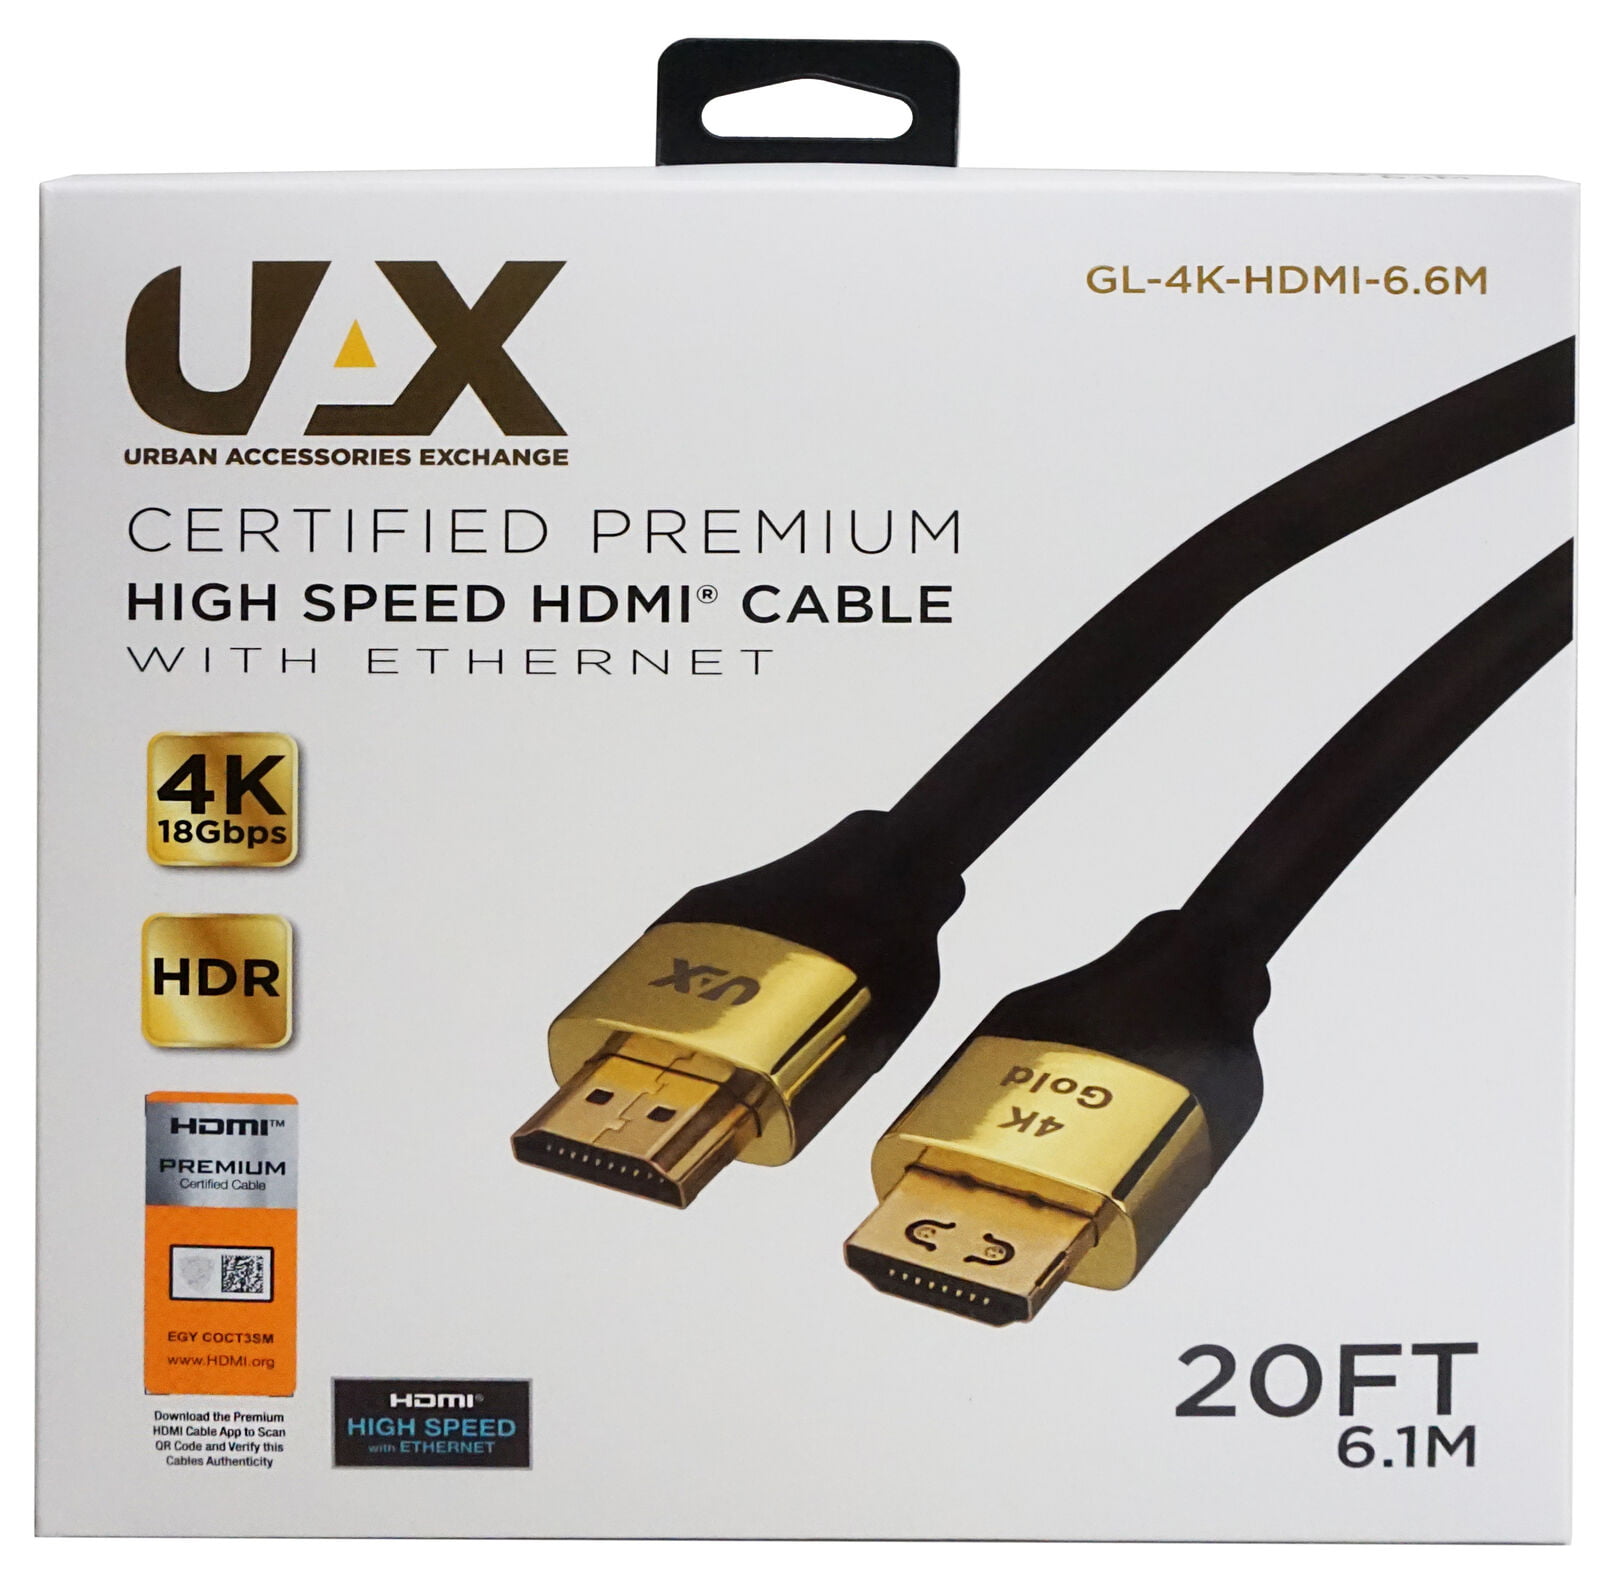 UAX Premium High Speed 4K HDR HDMI Cable Ethernet - 20 Ft Walmart.com